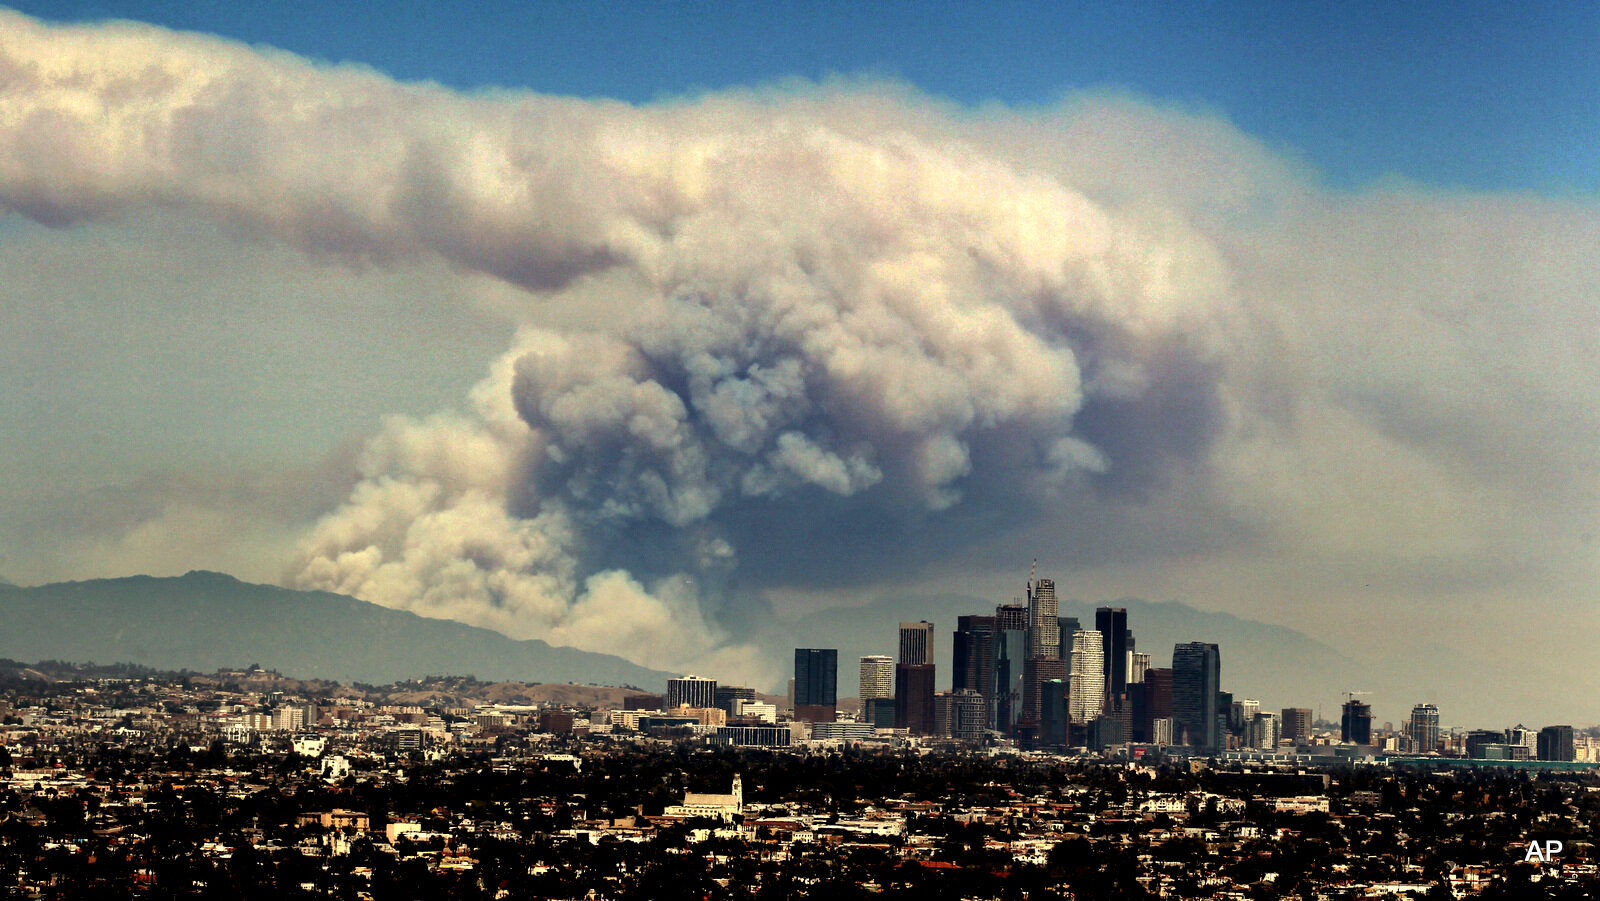 Smoke from wildfires burning in Angeles National Forest fills the sky behind the Los Angeles skyline on Monday, June 20, 2016. The wildfires several miles apart devoured hundreds of acres of brush on steep slopes above foothill suburbs erupted in Southern California as an intensifying heat wave stretching from the West Coast to New Mexico blistered the region with triple-digit temperatures.